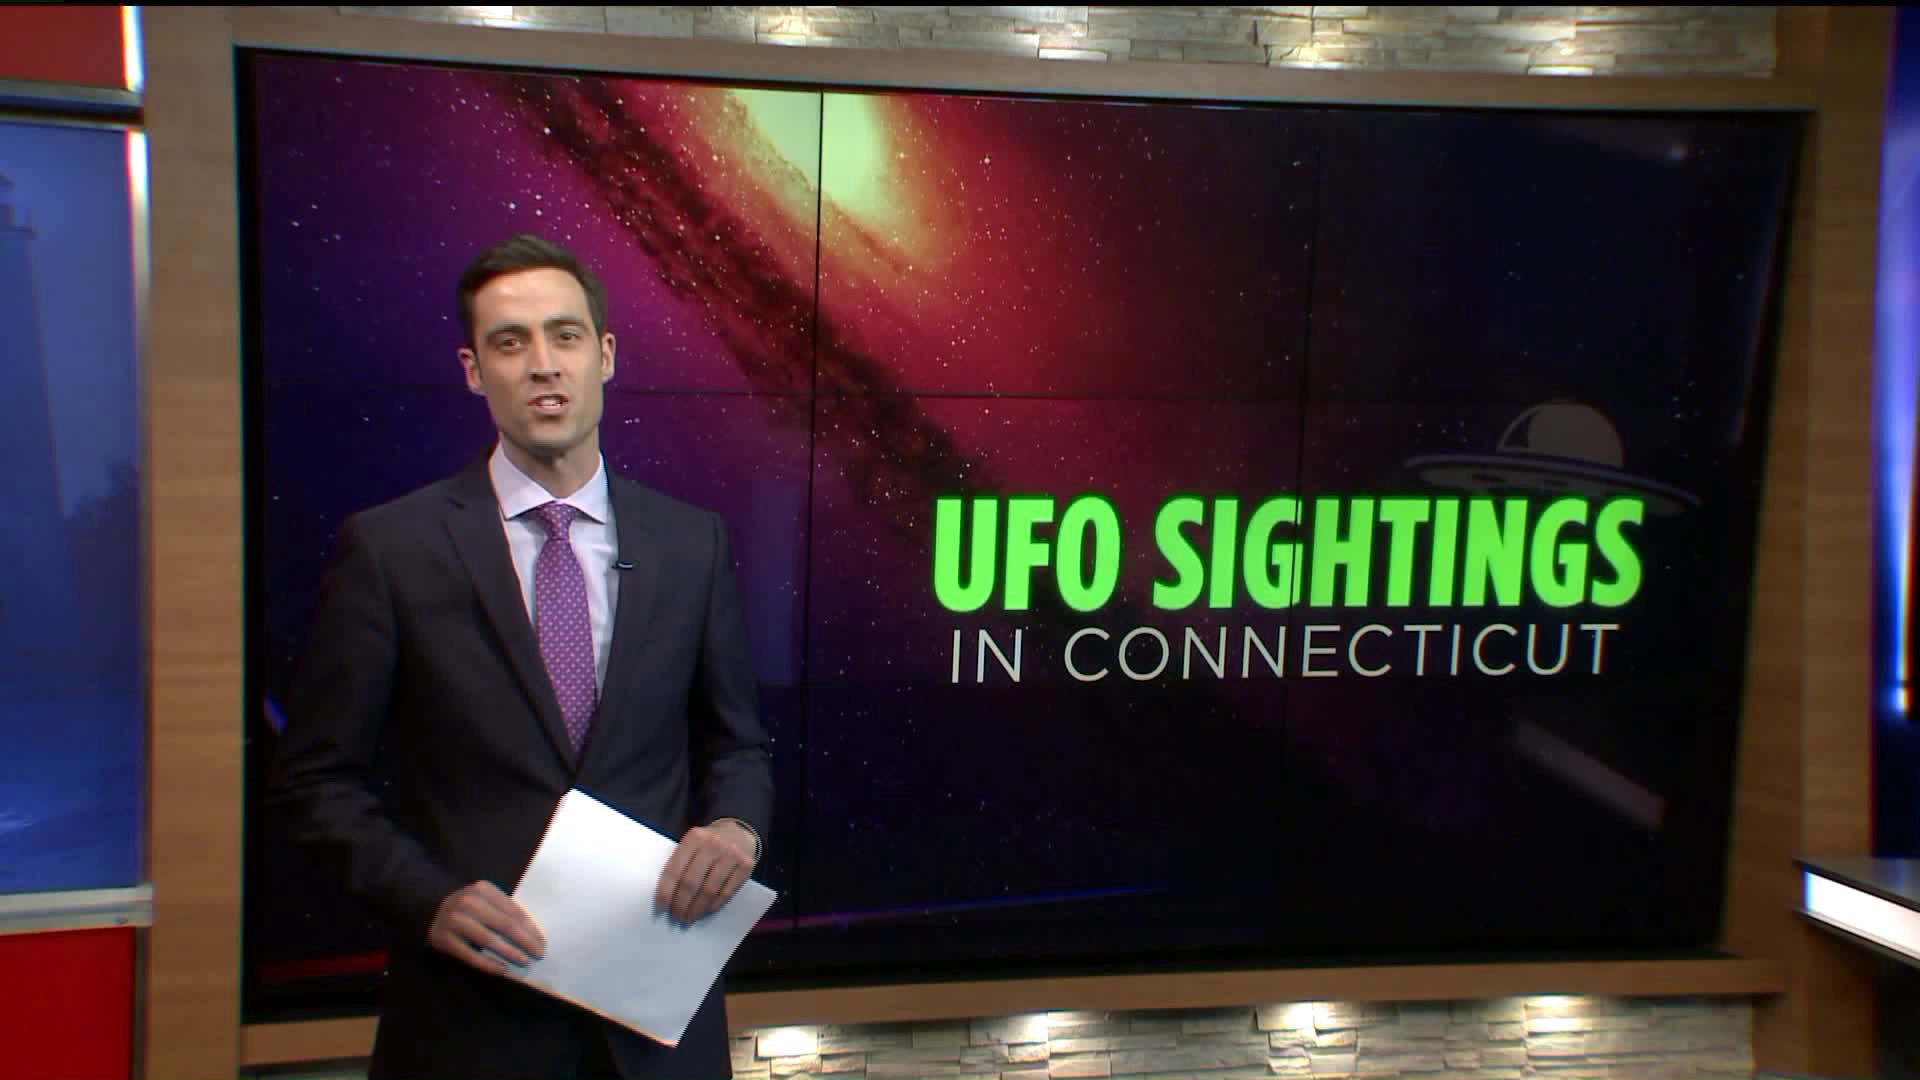 UFO sightings in Connecticut